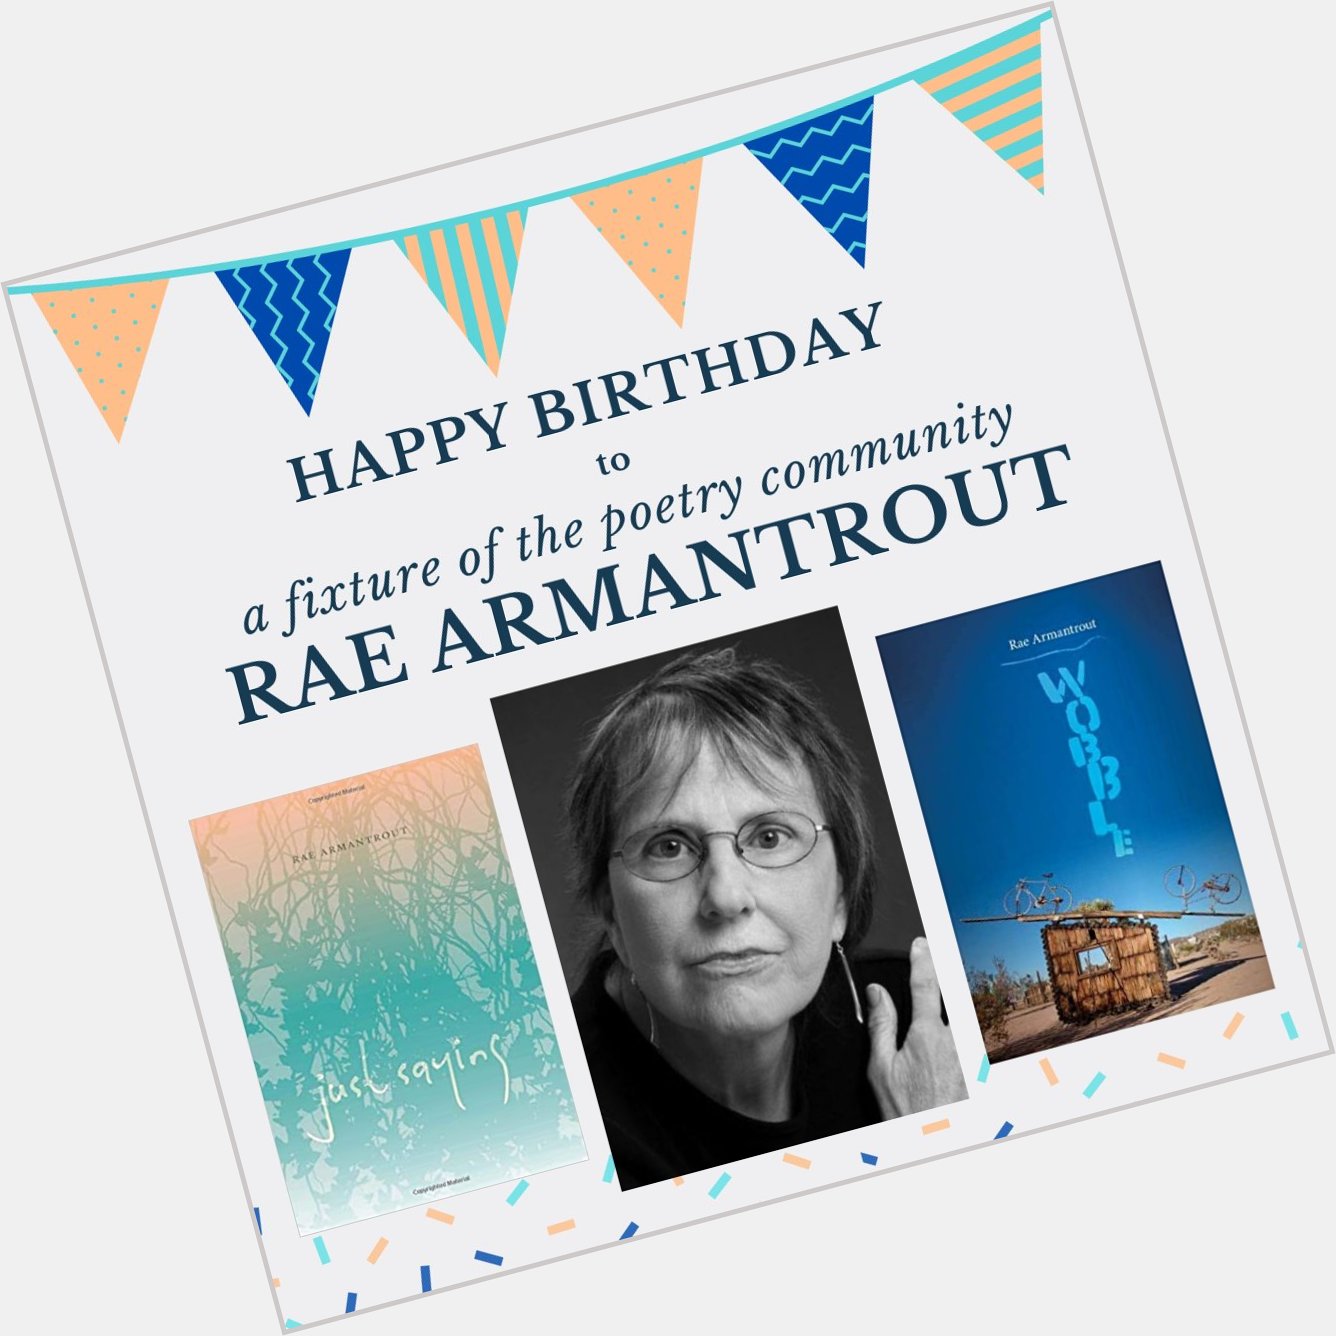 Happy birthday and Happy to the talented Rae Armantrout!   